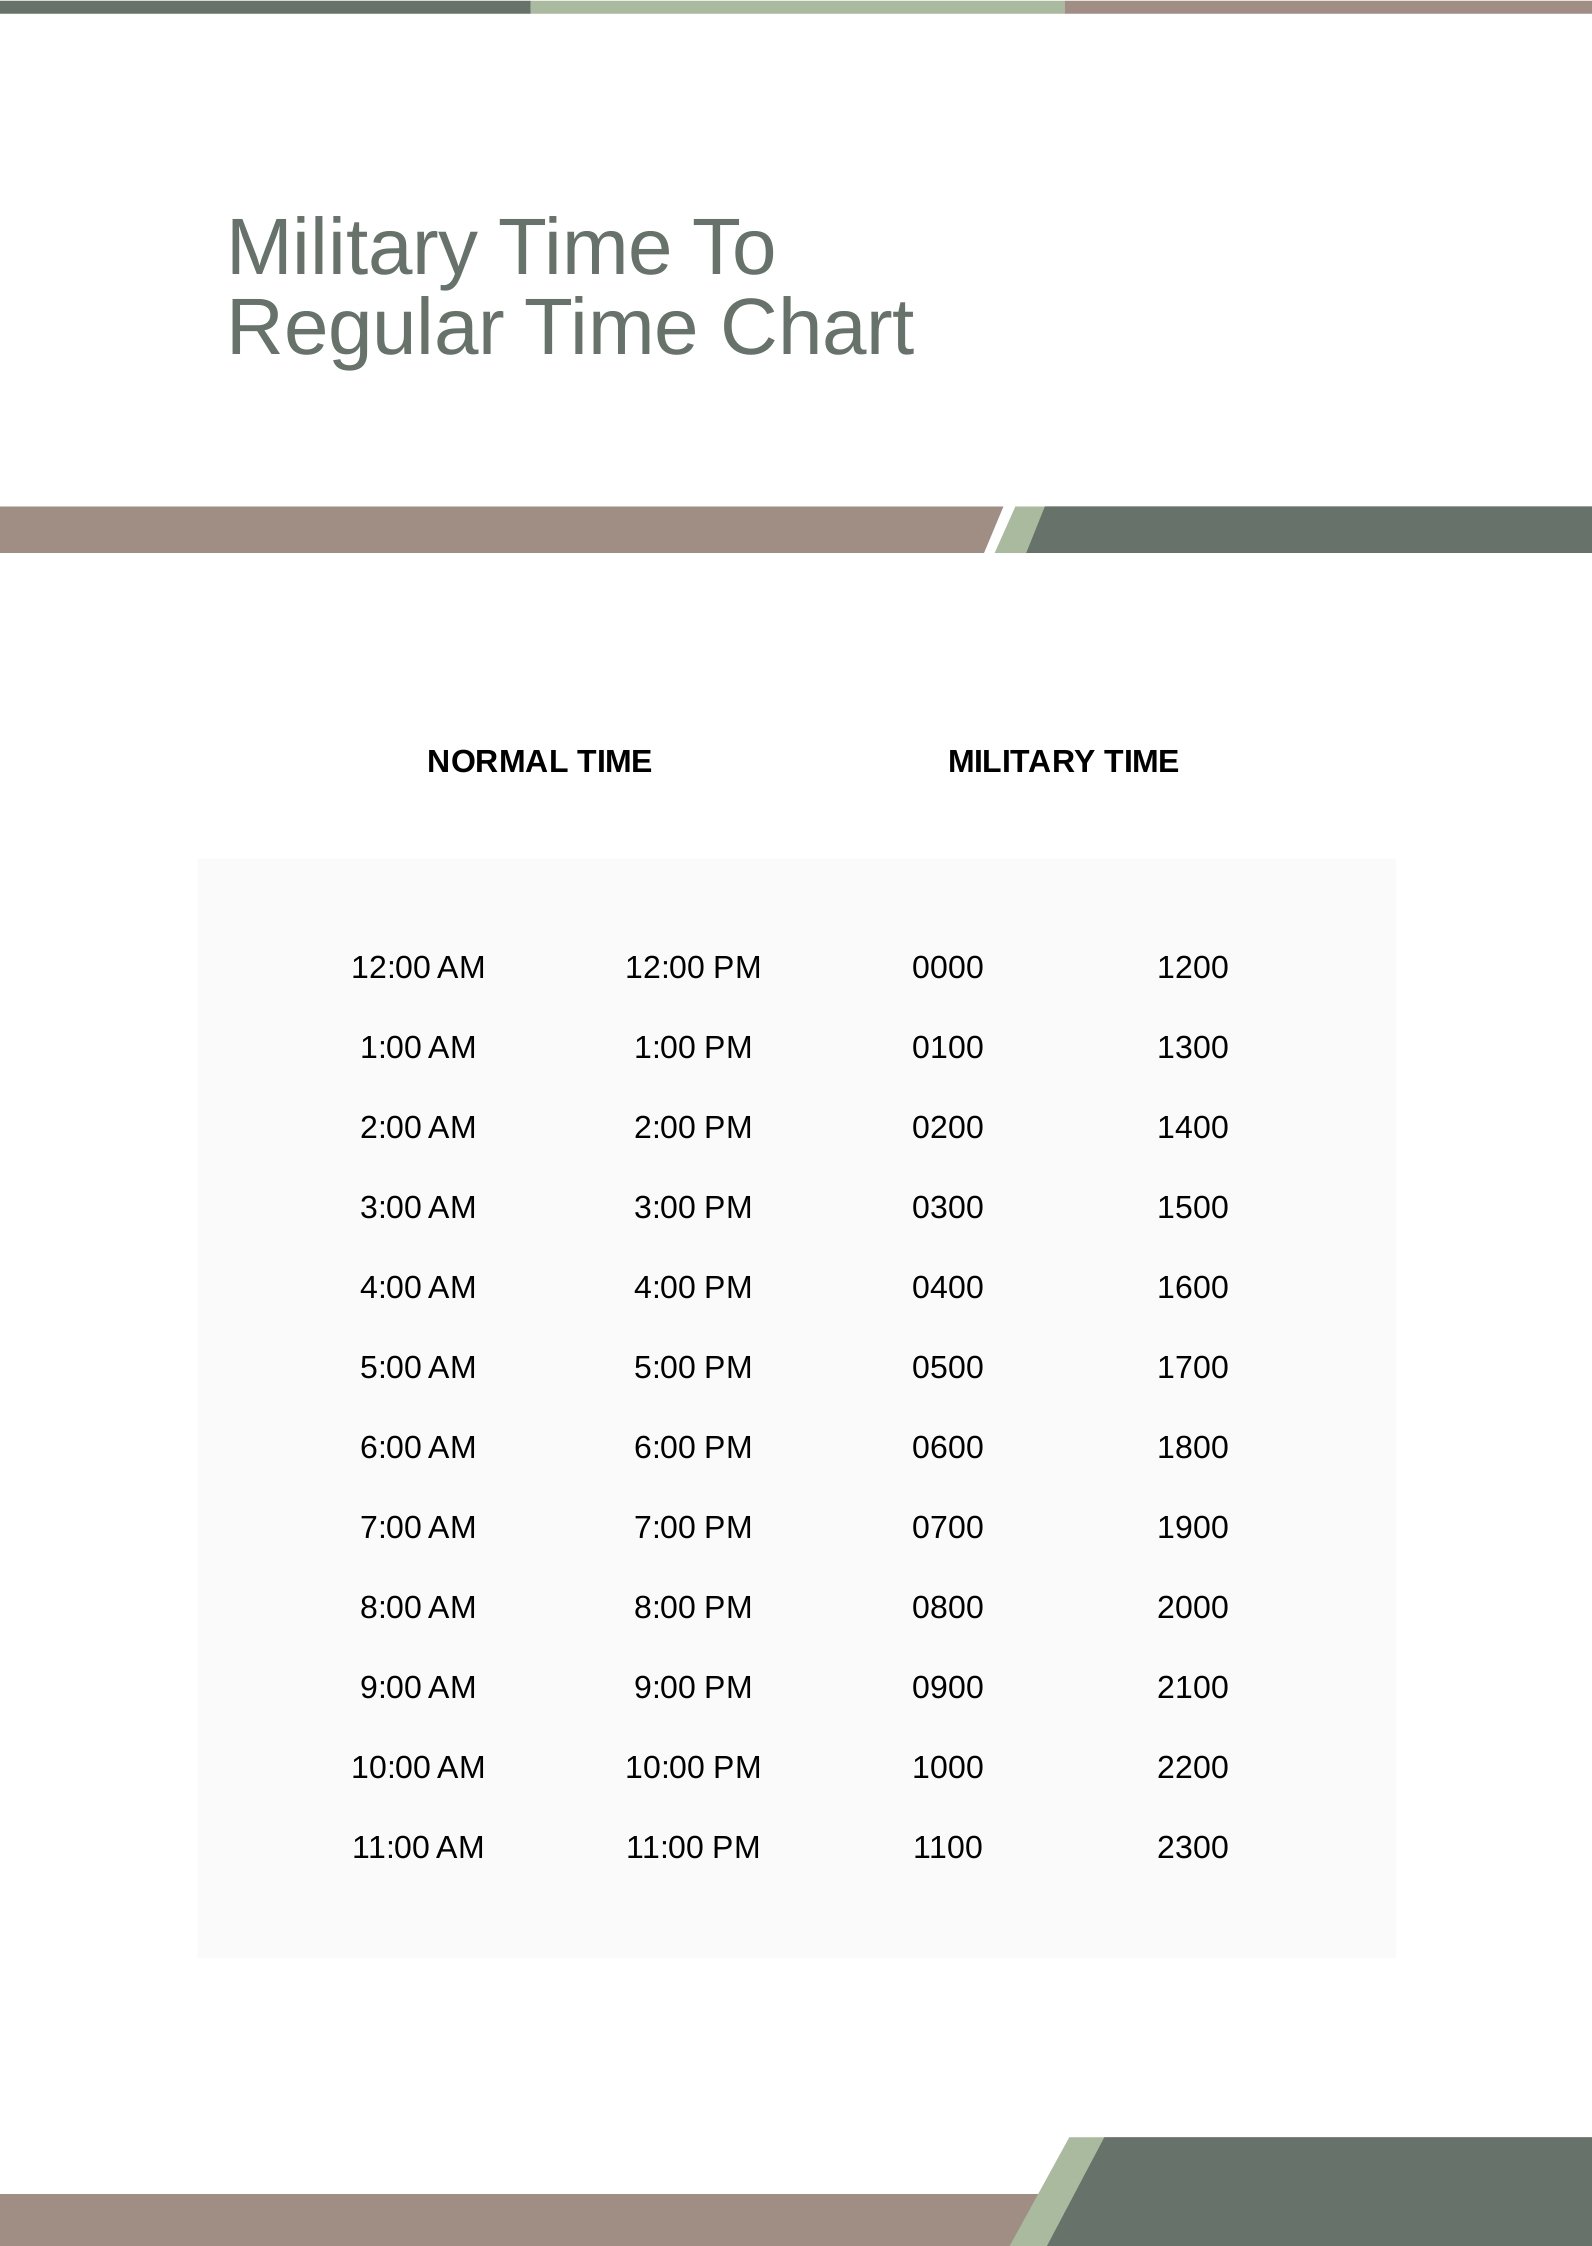 Military Time To Regular Time Chart in PDF